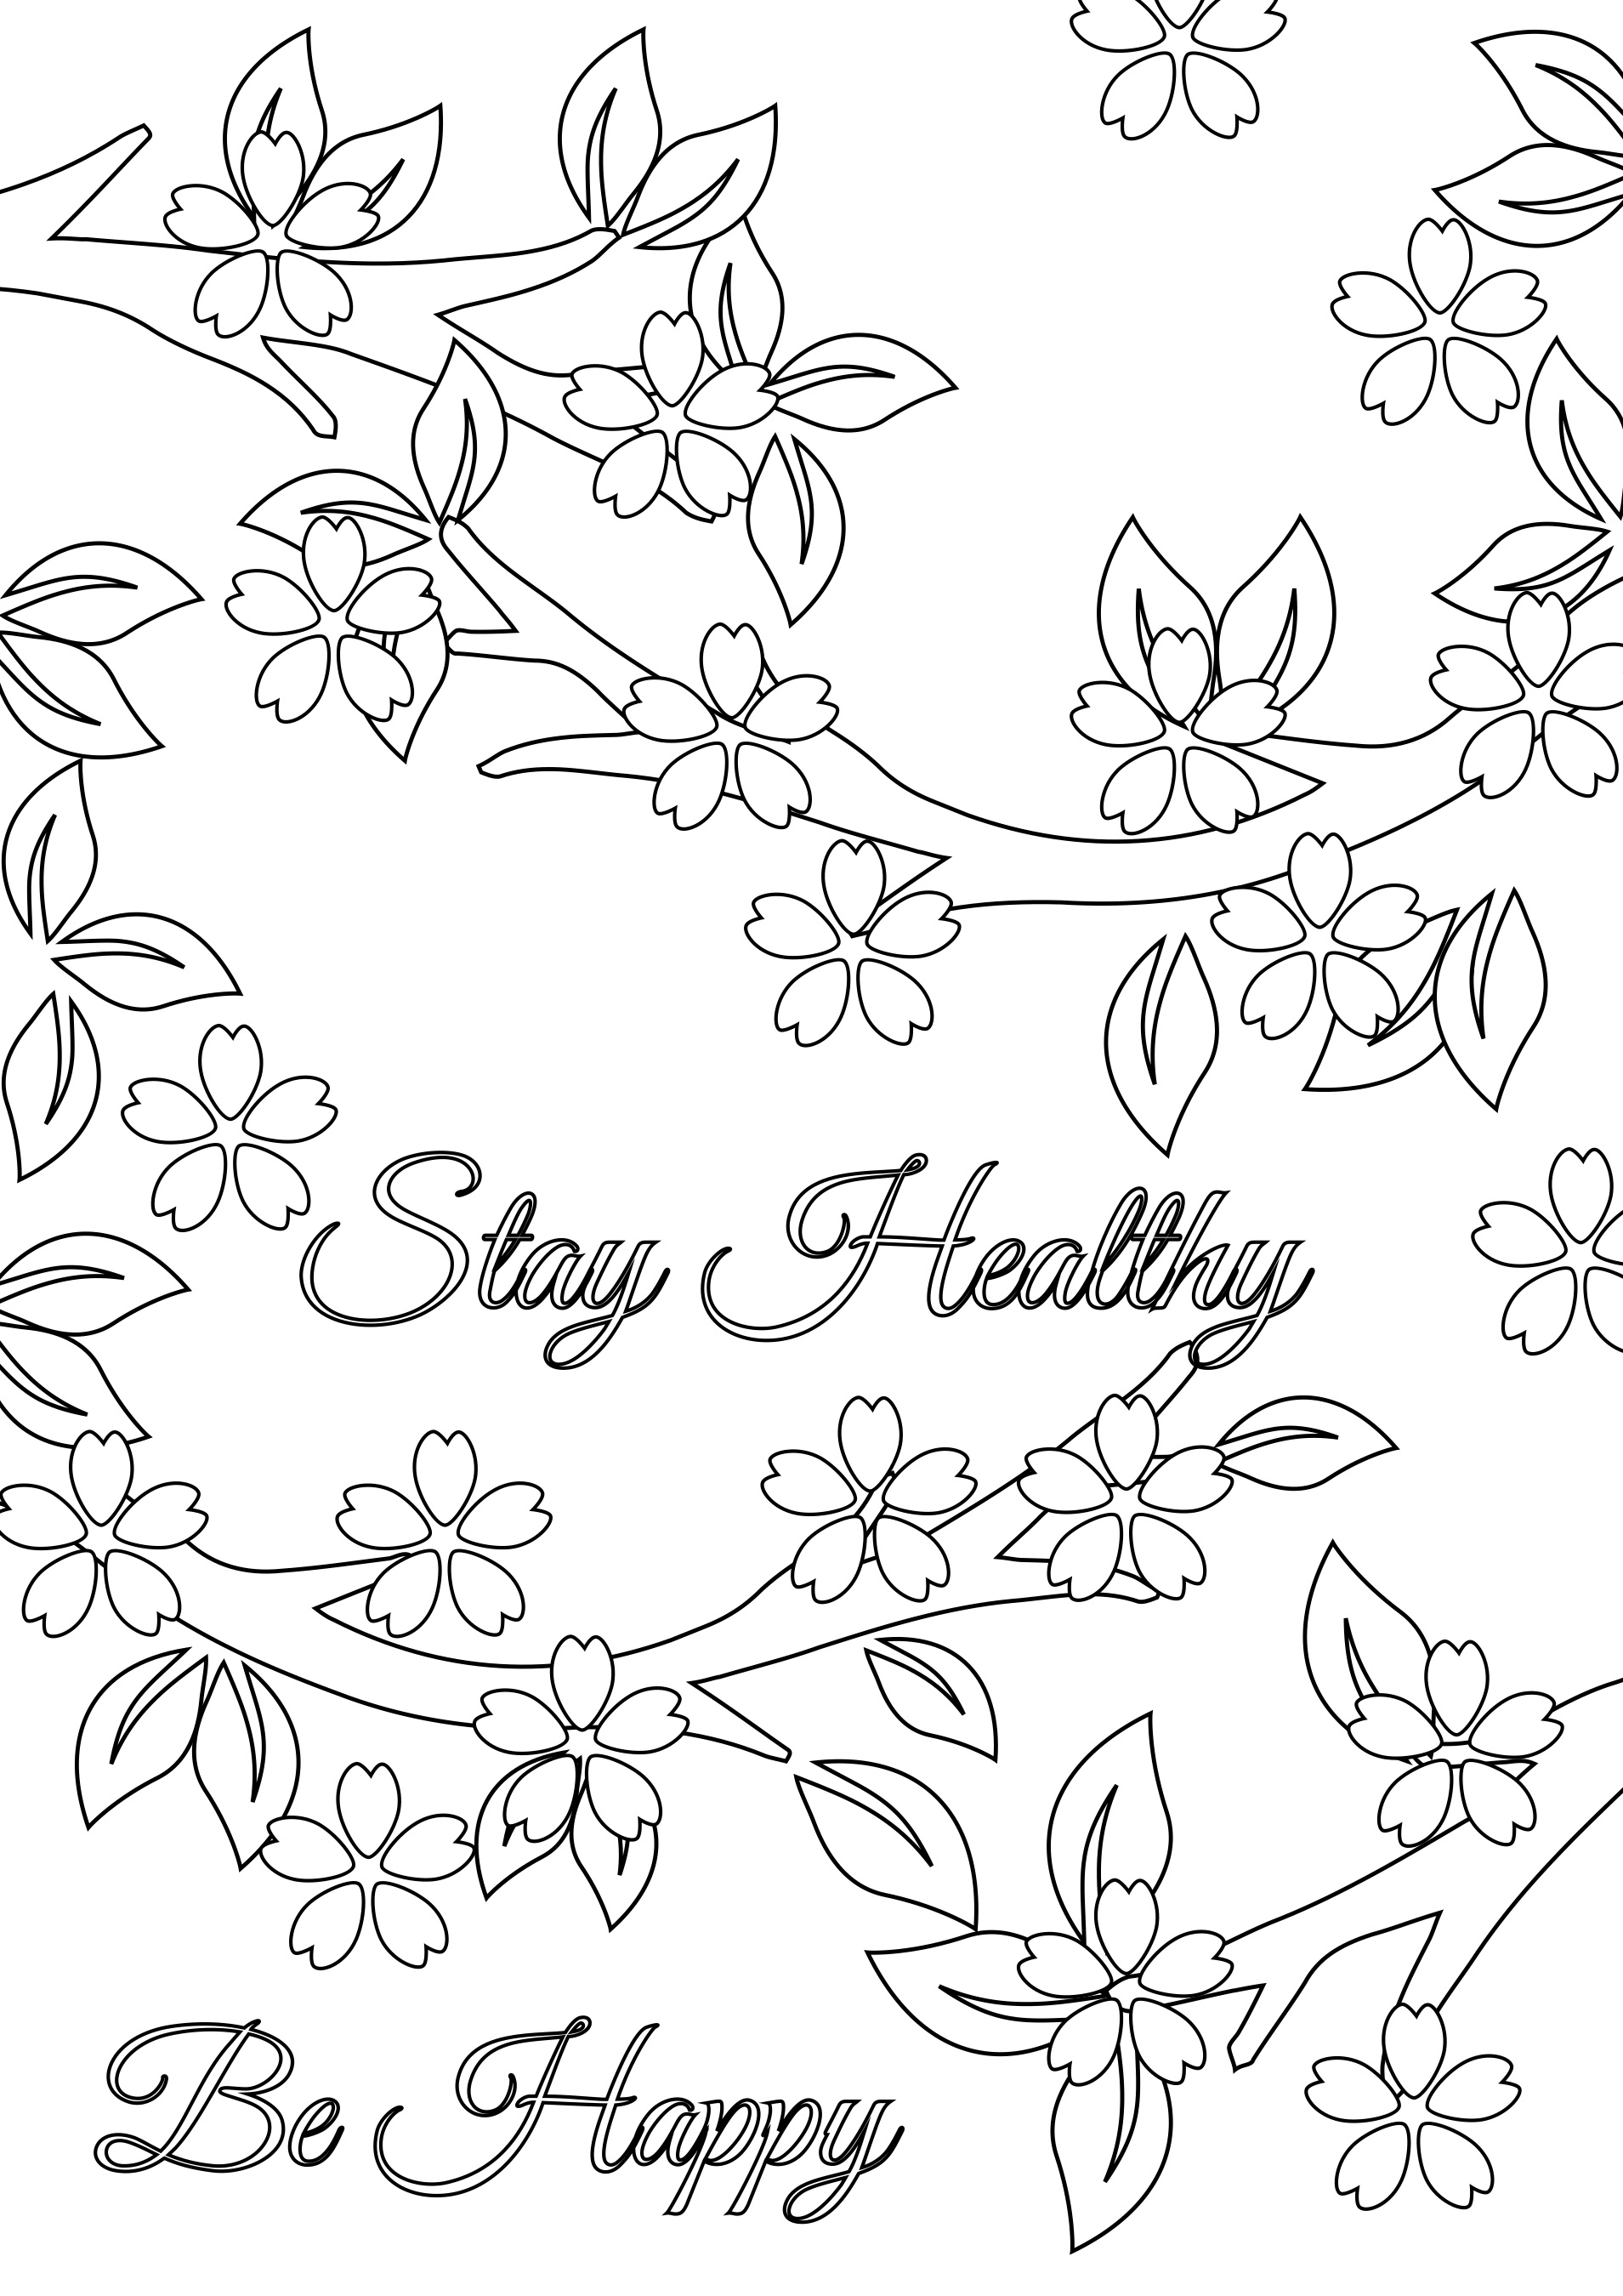 Stay Healthy Coloring Page Card